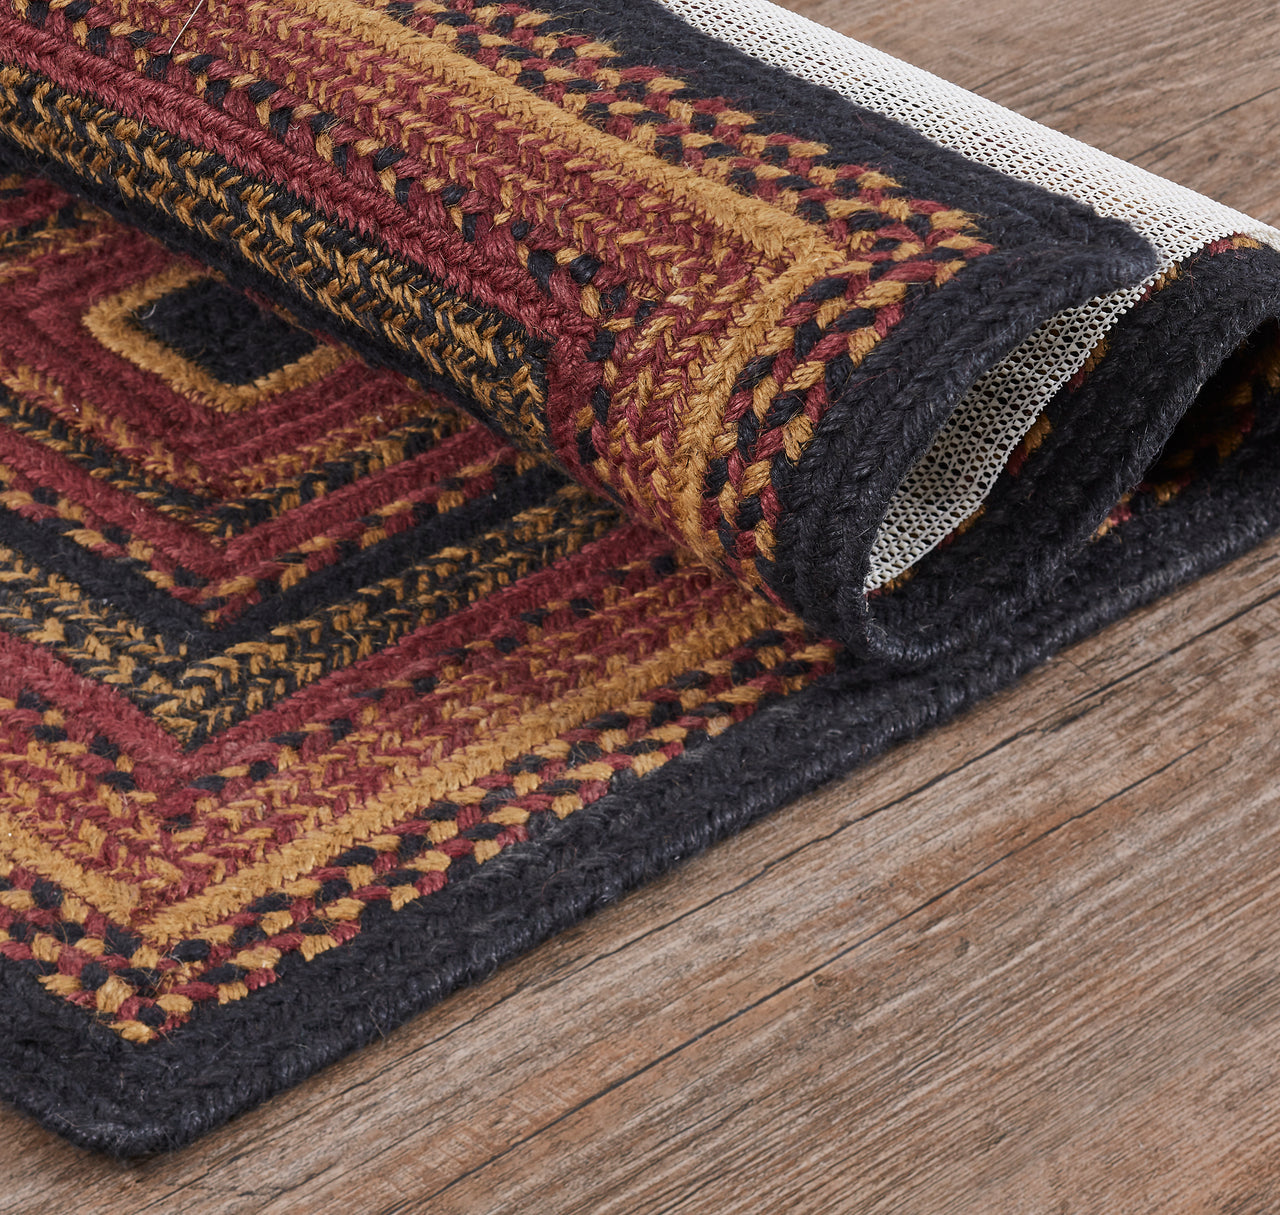 Heritage Farms Jute Braided Rug Rect. with Rug Pad 20"x30" VHC Brands